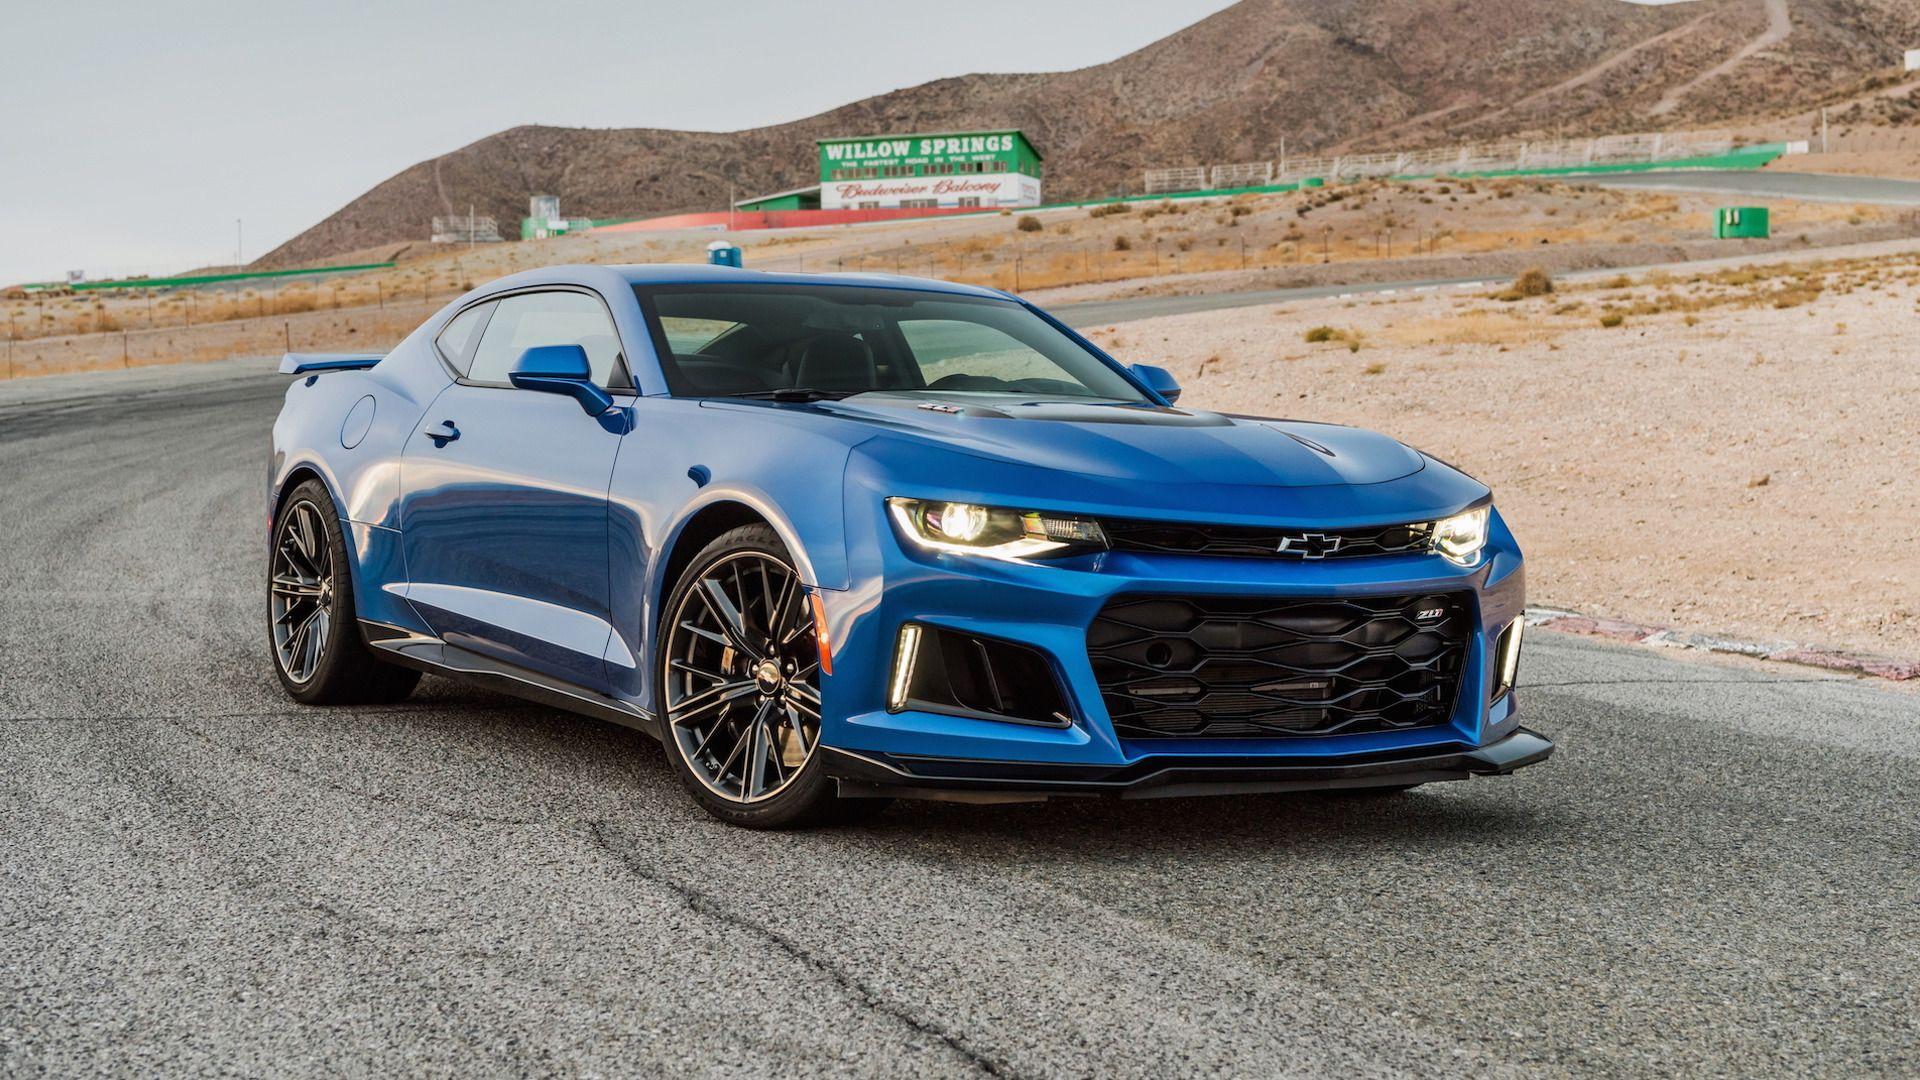 Chevy Camaro ZL1 is just shy of 200 mph top speed